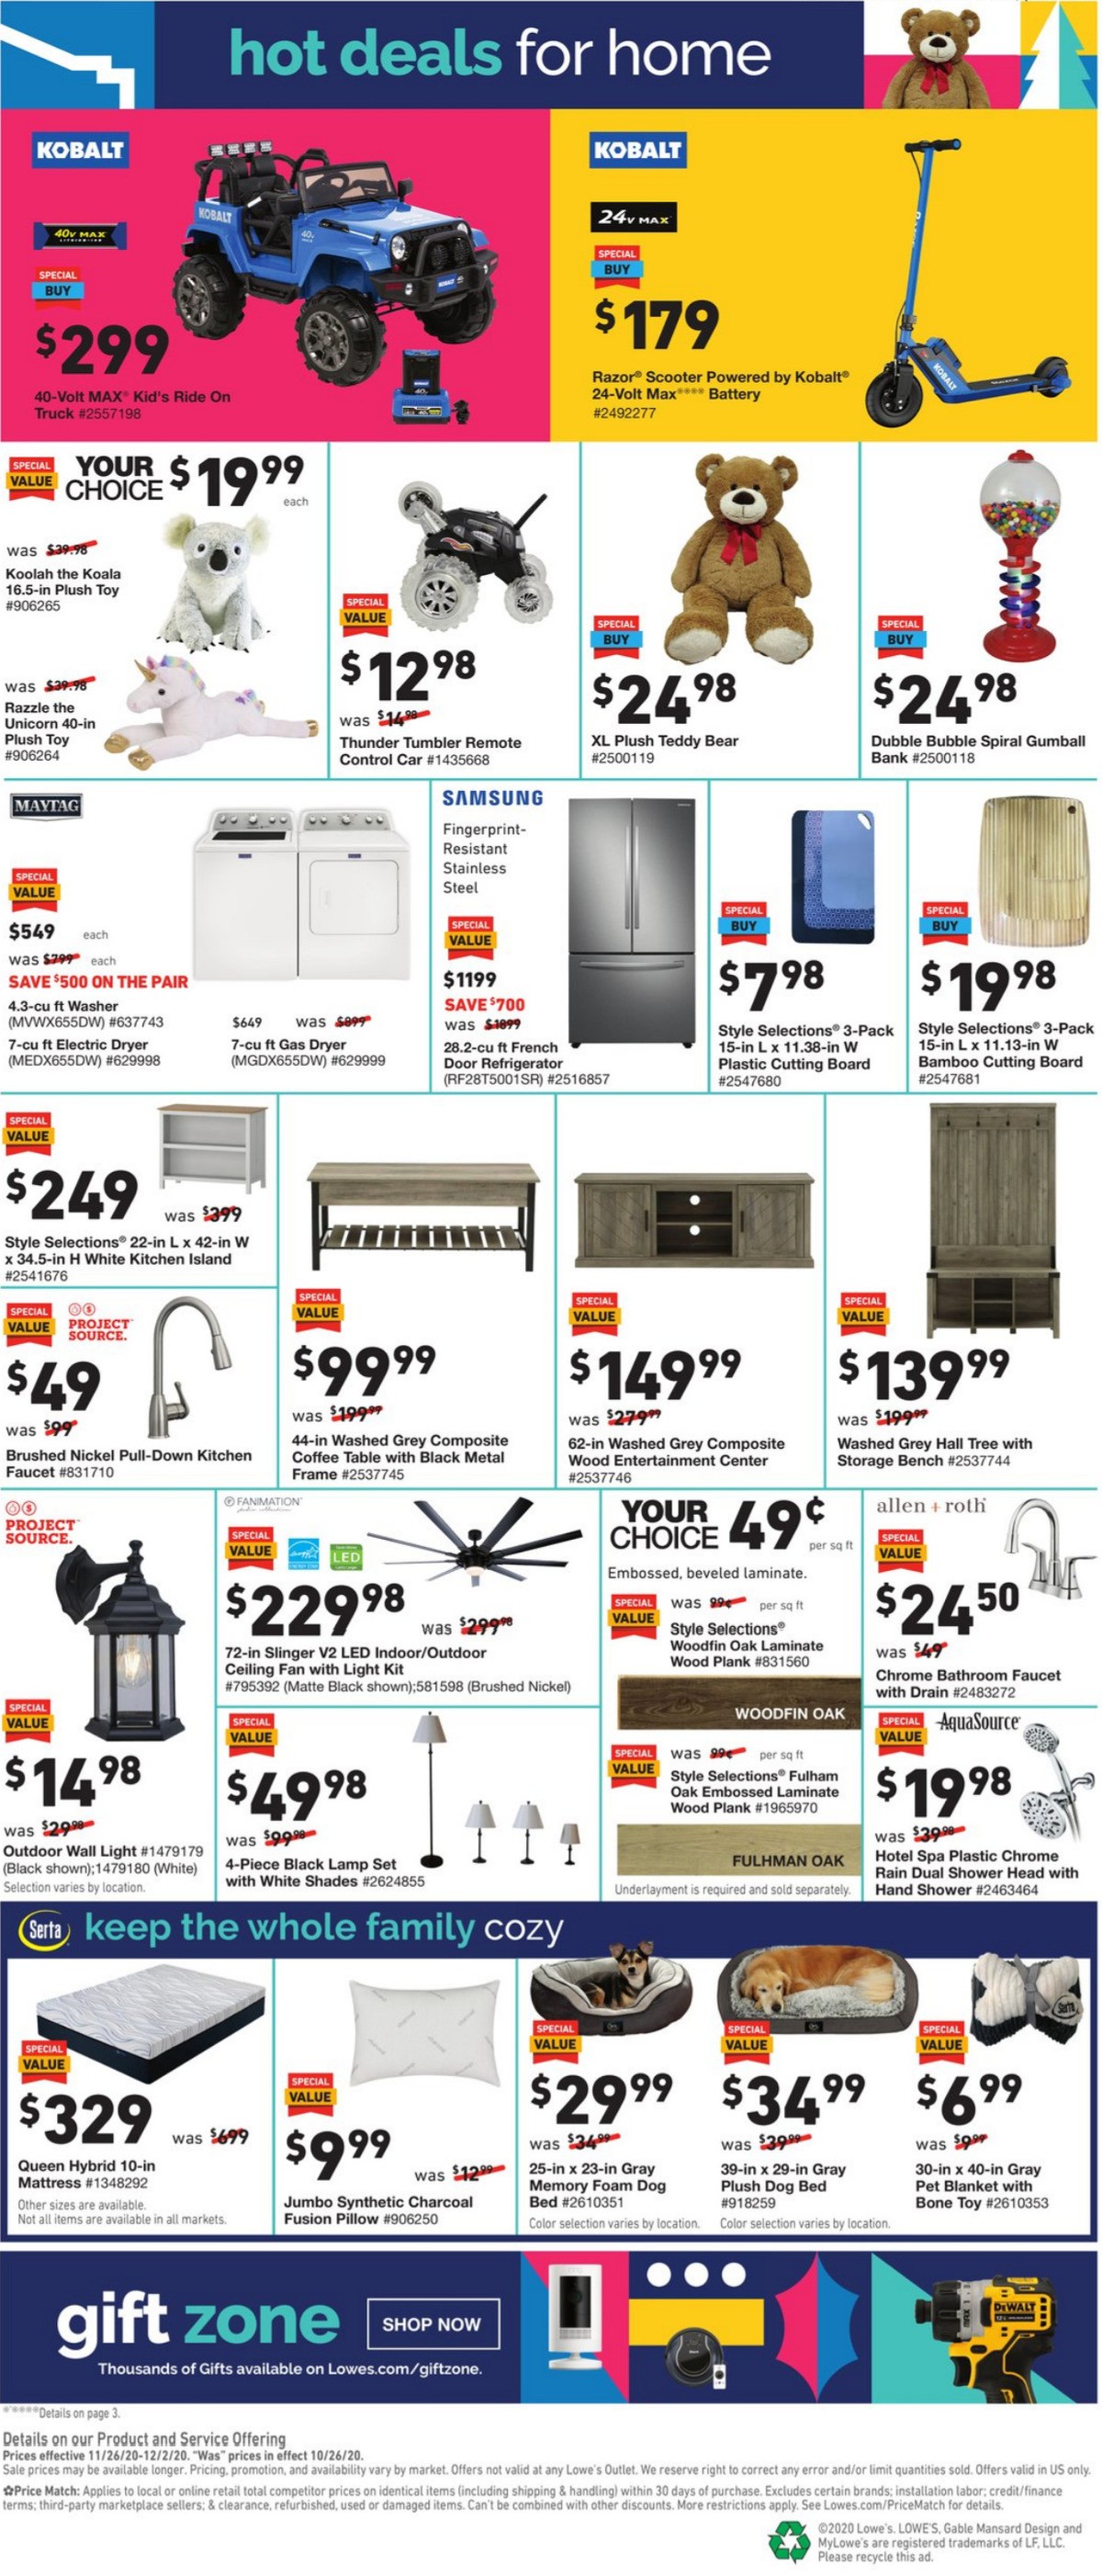 Lowe's Seasons of Savings Extended Event Weekly Ad from November 26